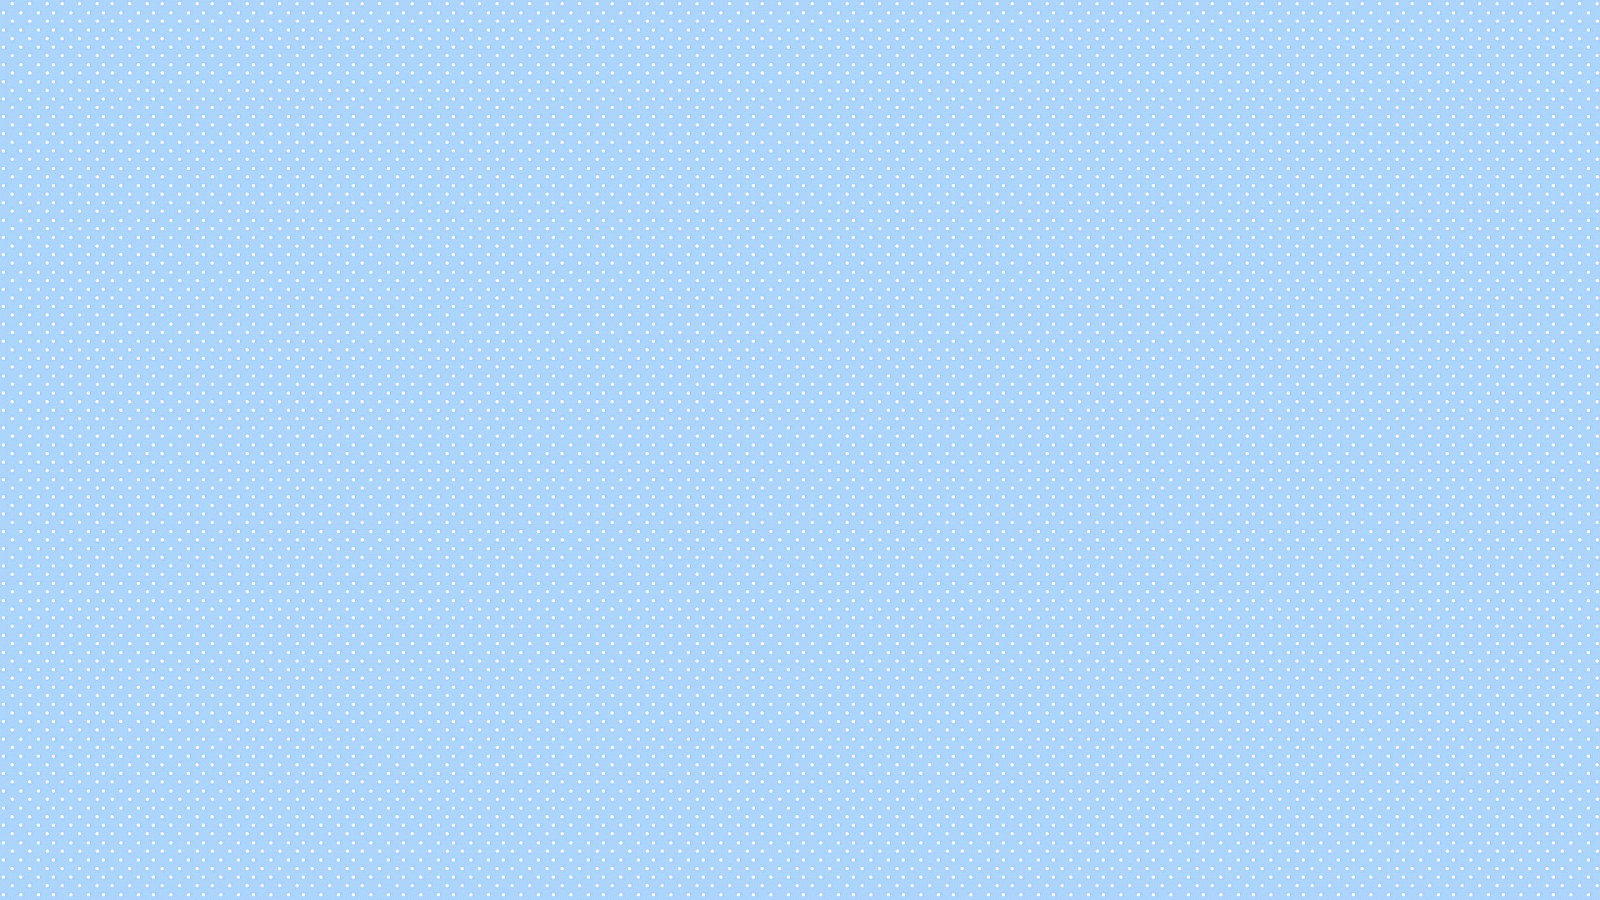 Pastel Blue Aesthetic Computer Wallpapers - Top Free Pastel Blue ...